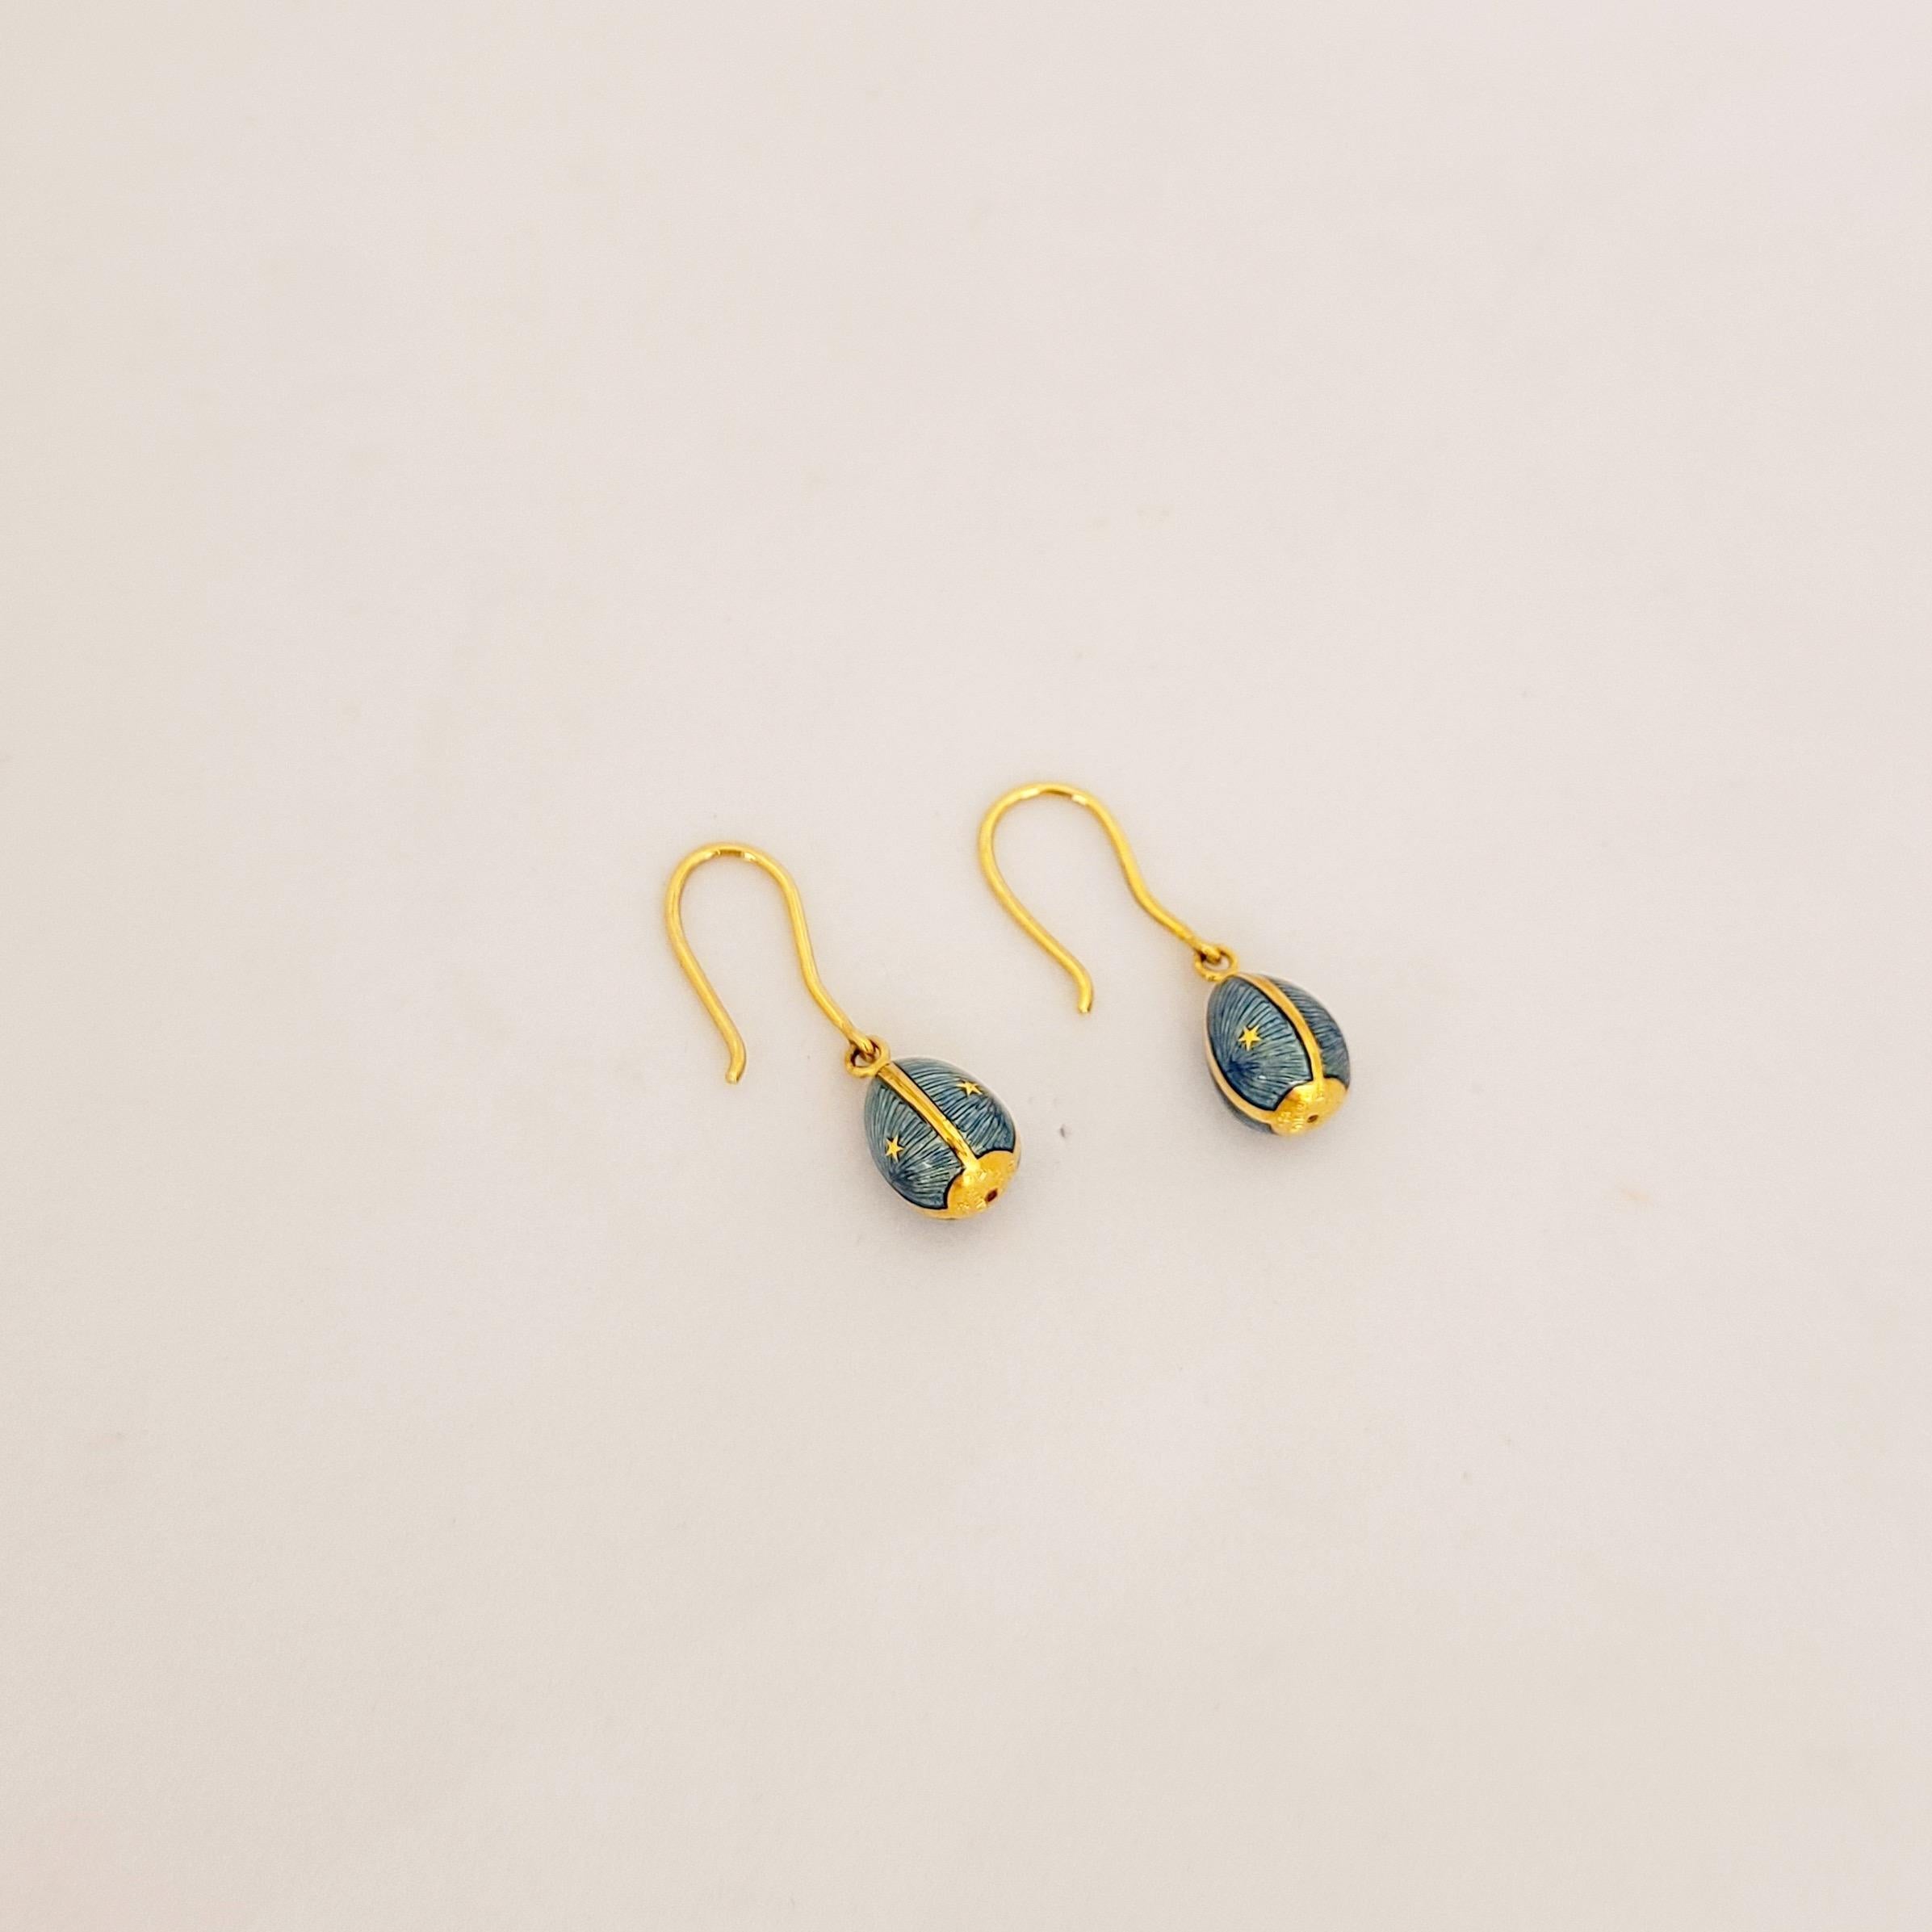 These modern 18 karat yellow gold Faberge earrings were crafted by Victor Mayer. Each earring features a single egg hanging from a gold wire.The sky blue eggs were crafted in the same tradition of the original Imperial eggs using Faberges iconic